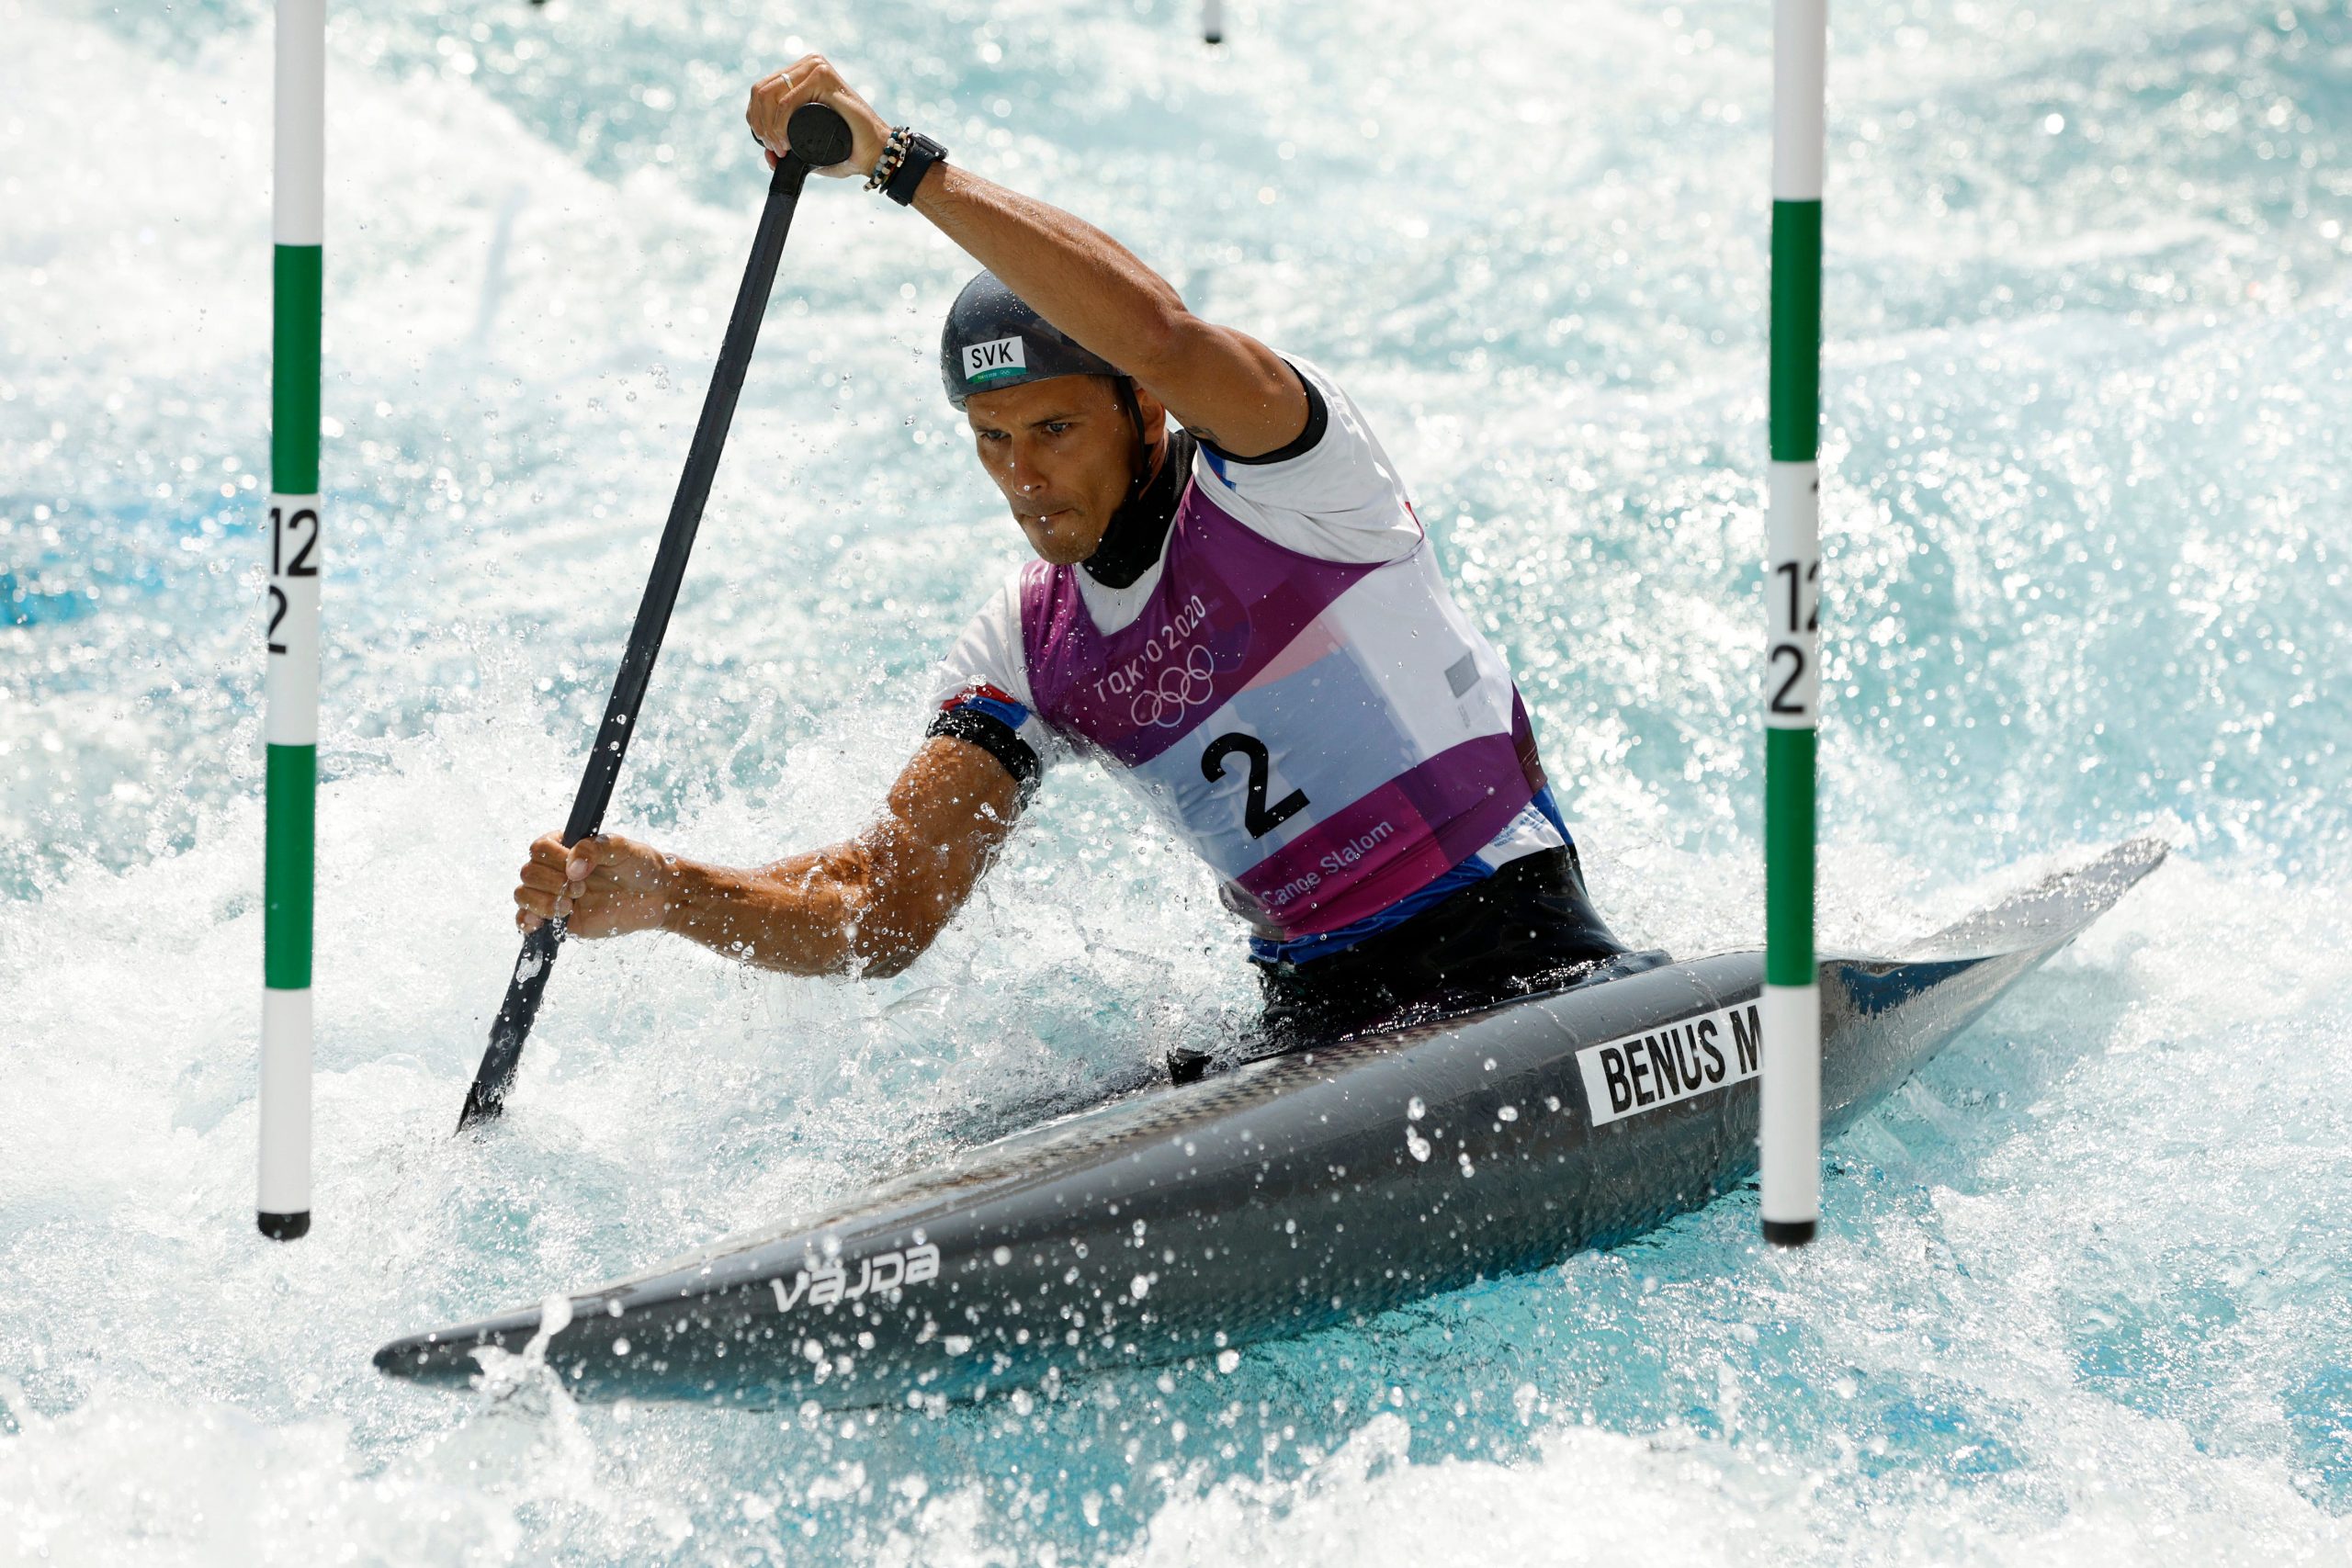 Canoeist Matej Beňuš paddles and propels his boat through a course at the Tokyo Olympics.